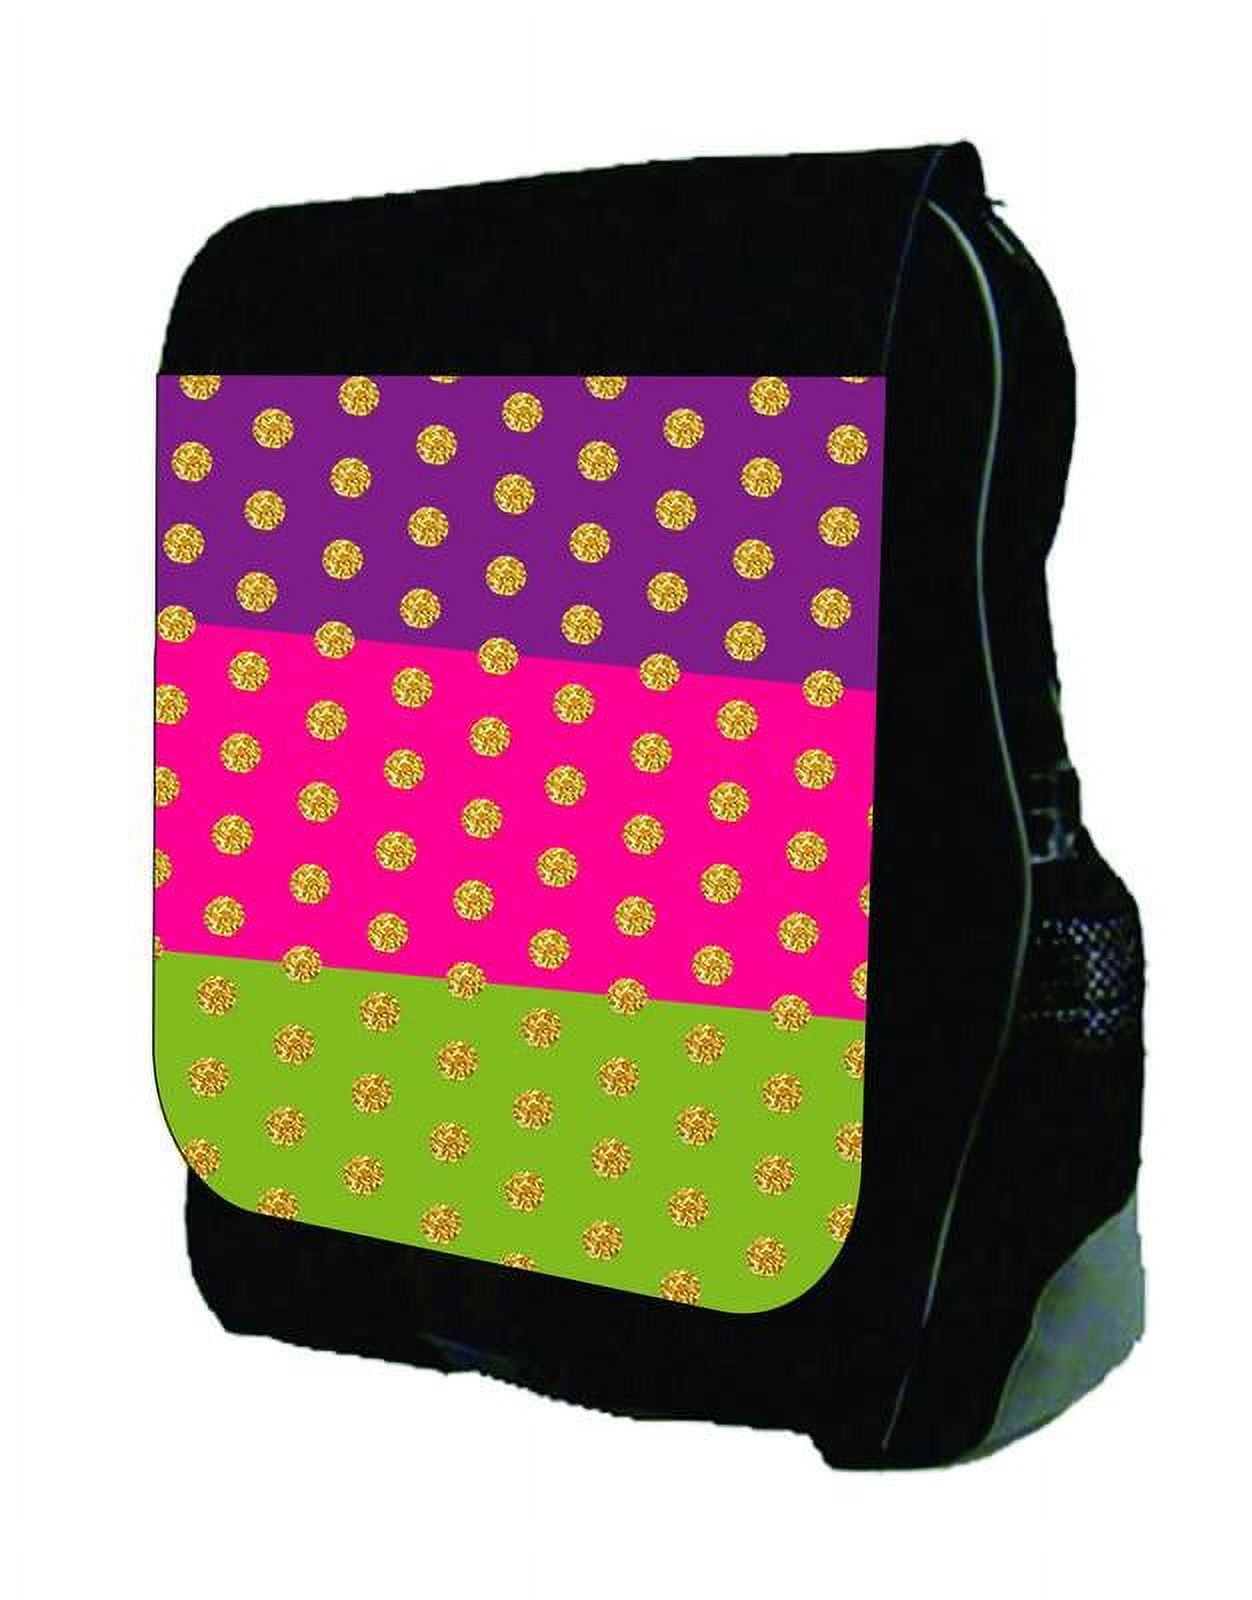 Purple, Hot Pink, Lime Colorblocked Stripes with Gold Polka Dots  - Black School Backpack - image 1 of 4